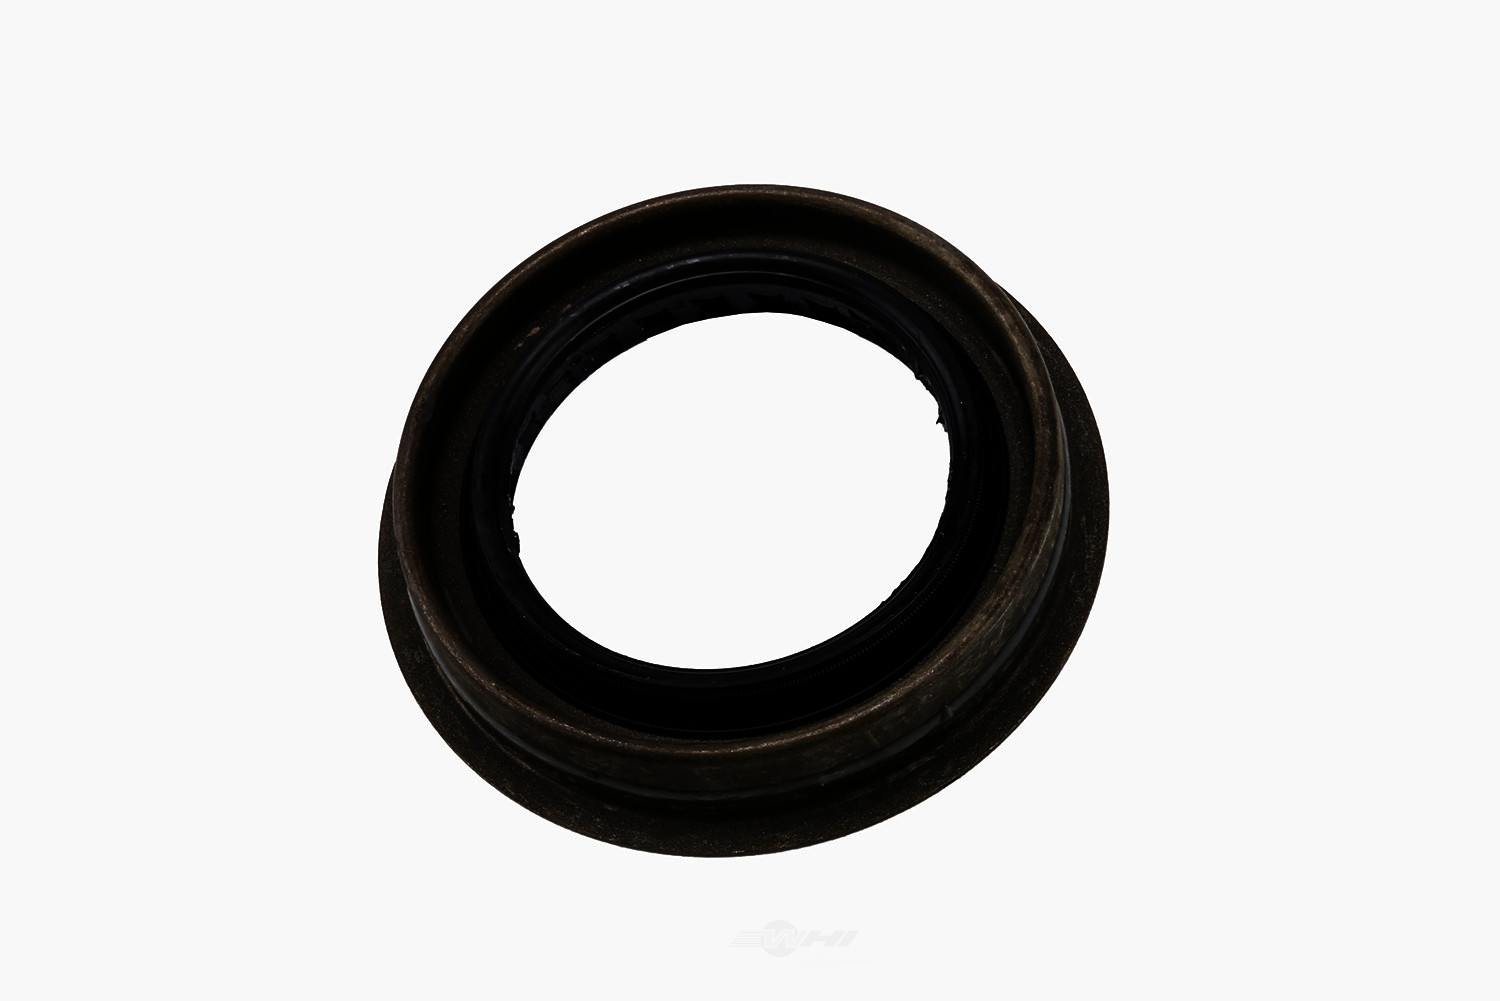 GM GENUINE PARTS - Automatic Transmission Drive Shaft Oil Seal - GMP 24228886